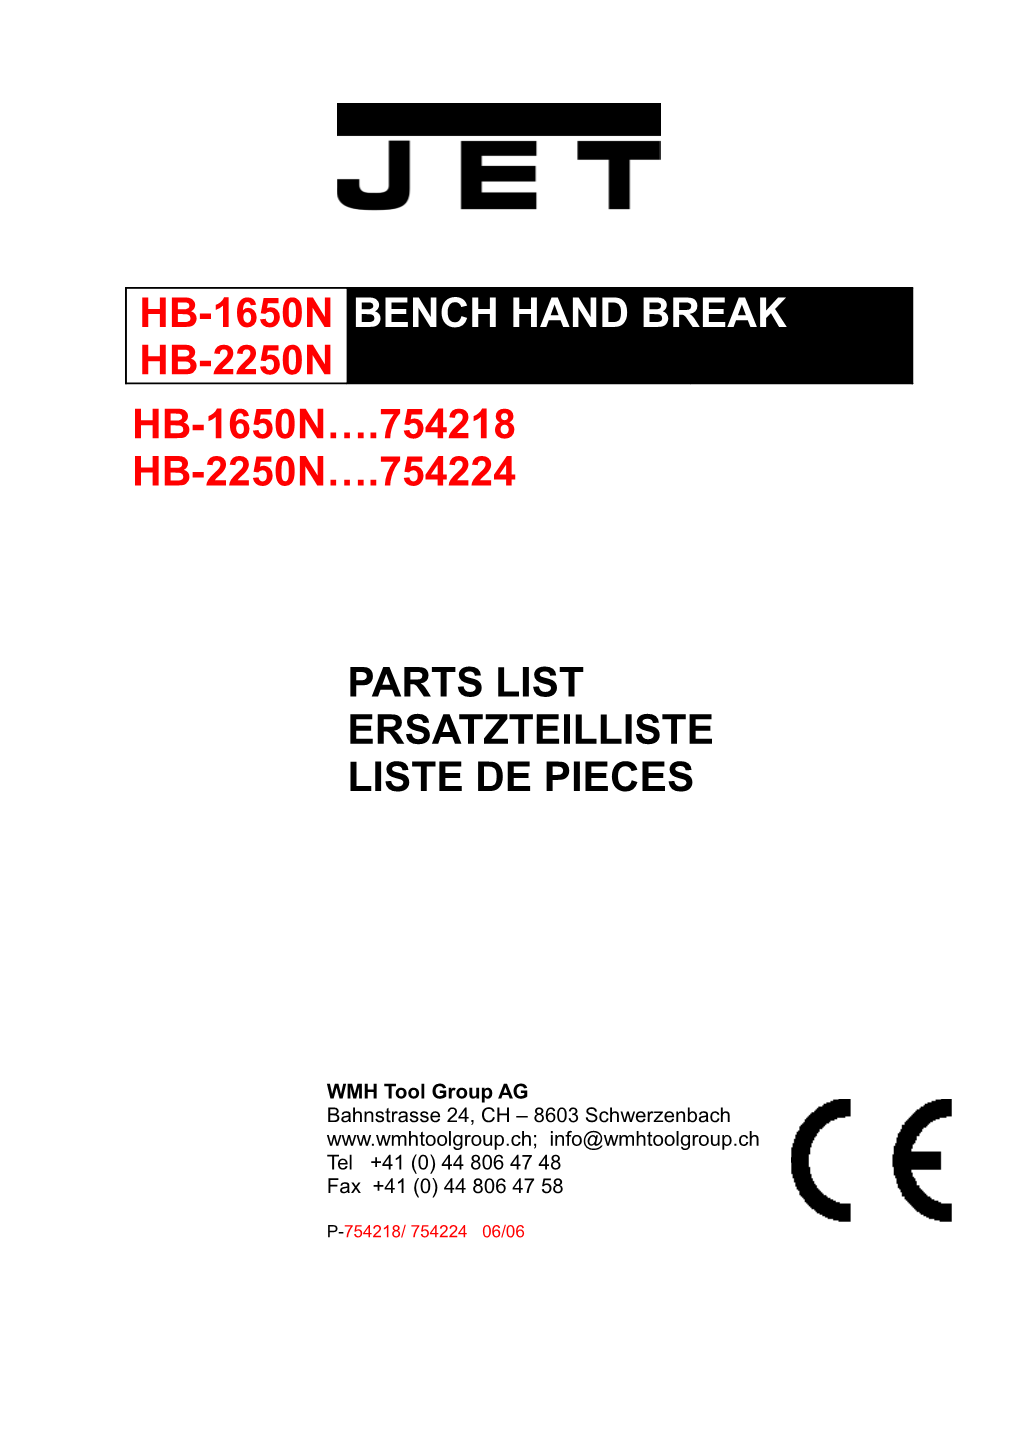 Parts List for the JMD-18 (CE) Mill/Drill